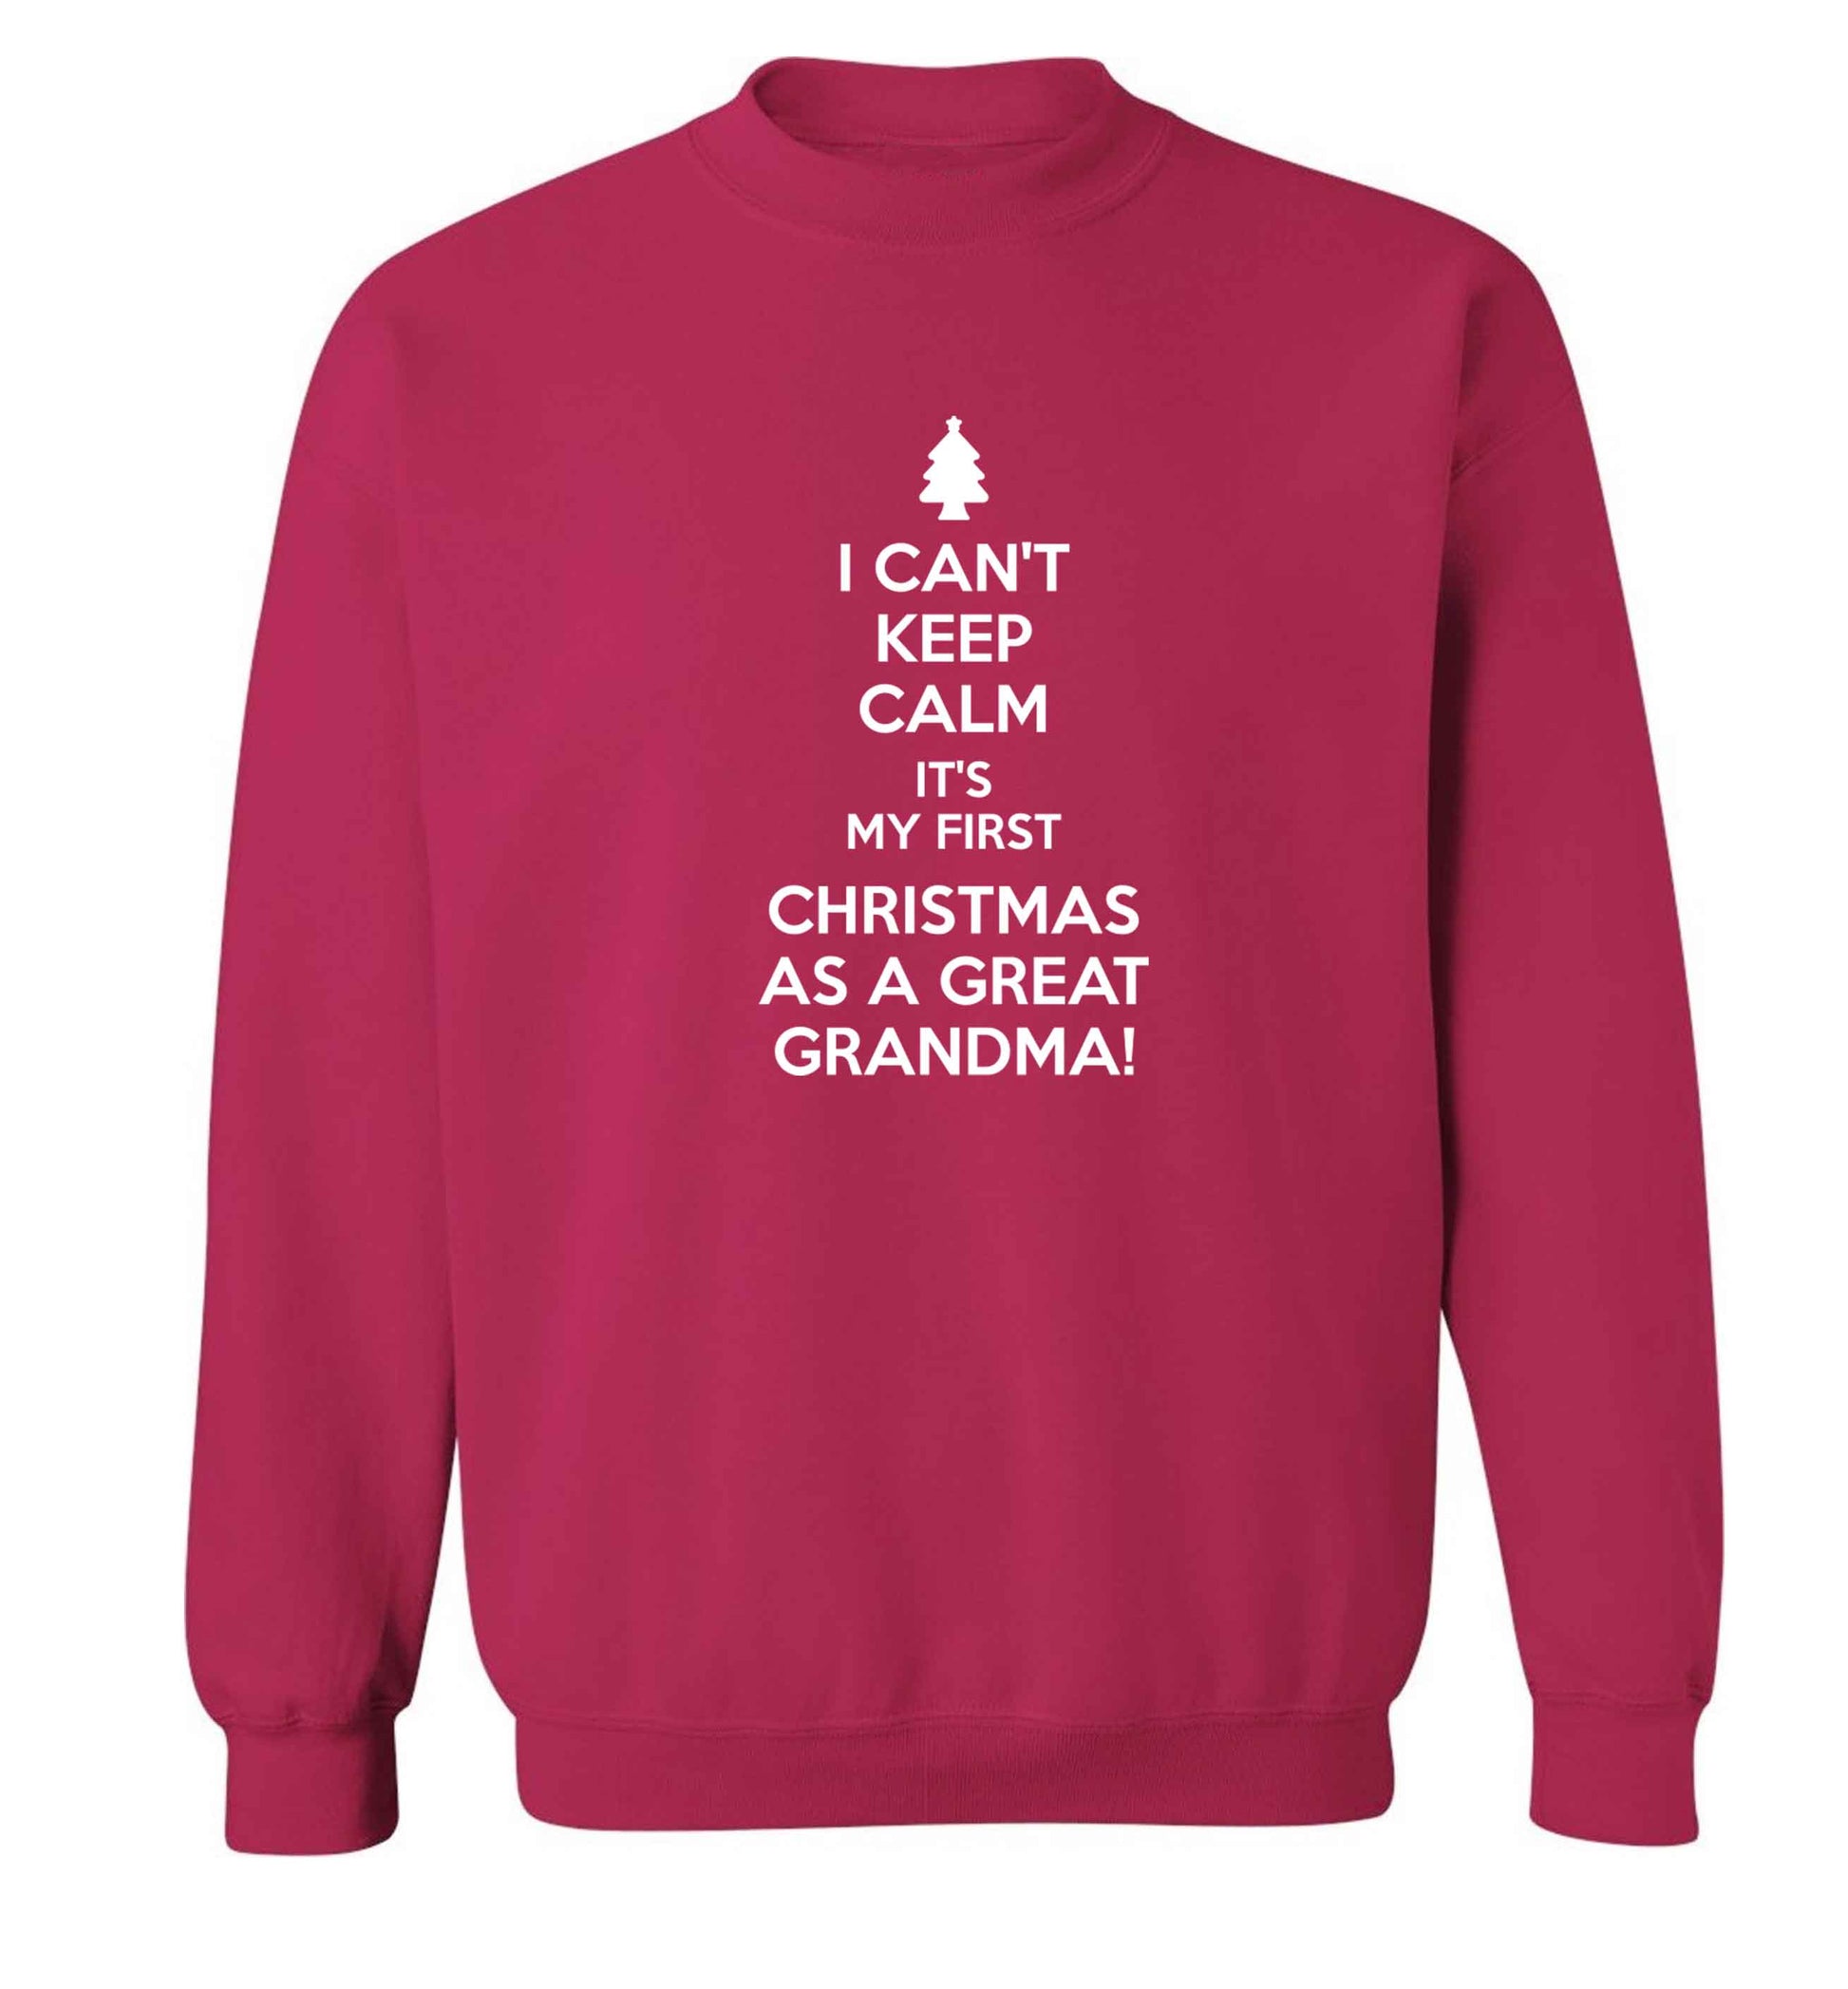 I can't keep calm it's my first Christmas as a great grandma! Adult's unisex pink Sweater 2XL